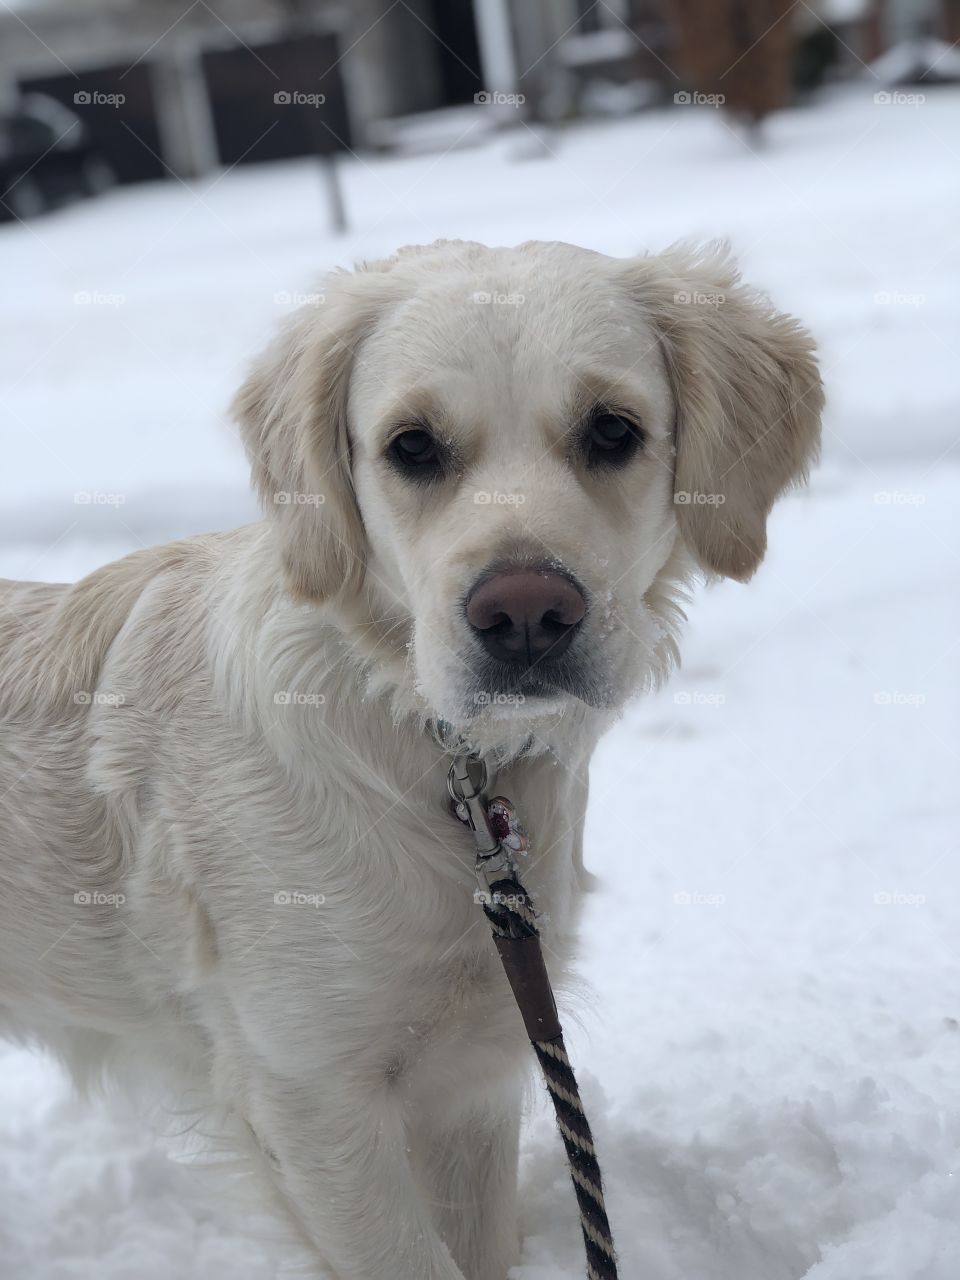 This was my beautiful dog Rosie when went on a snowy walk!!